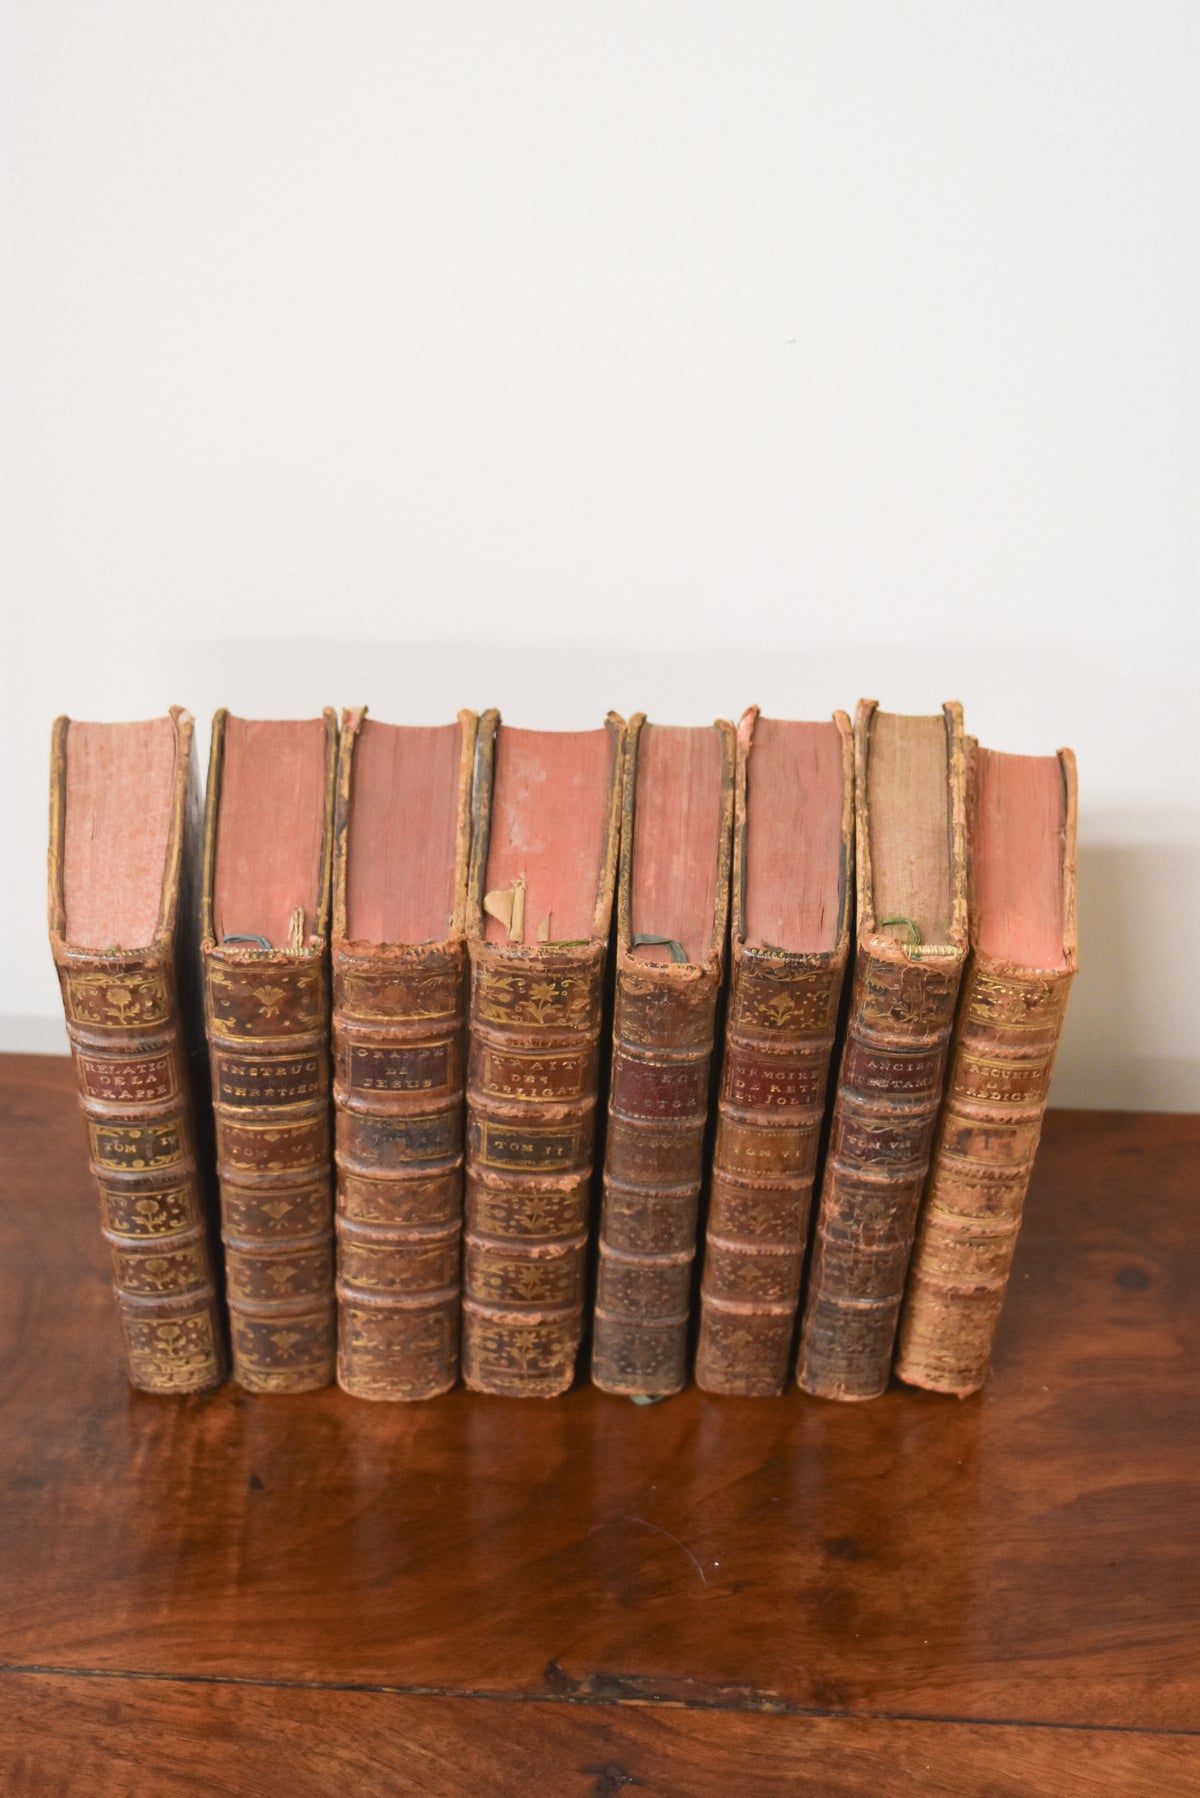 Set of 8 Antique Leatherback Books with Metallic Floral Spine